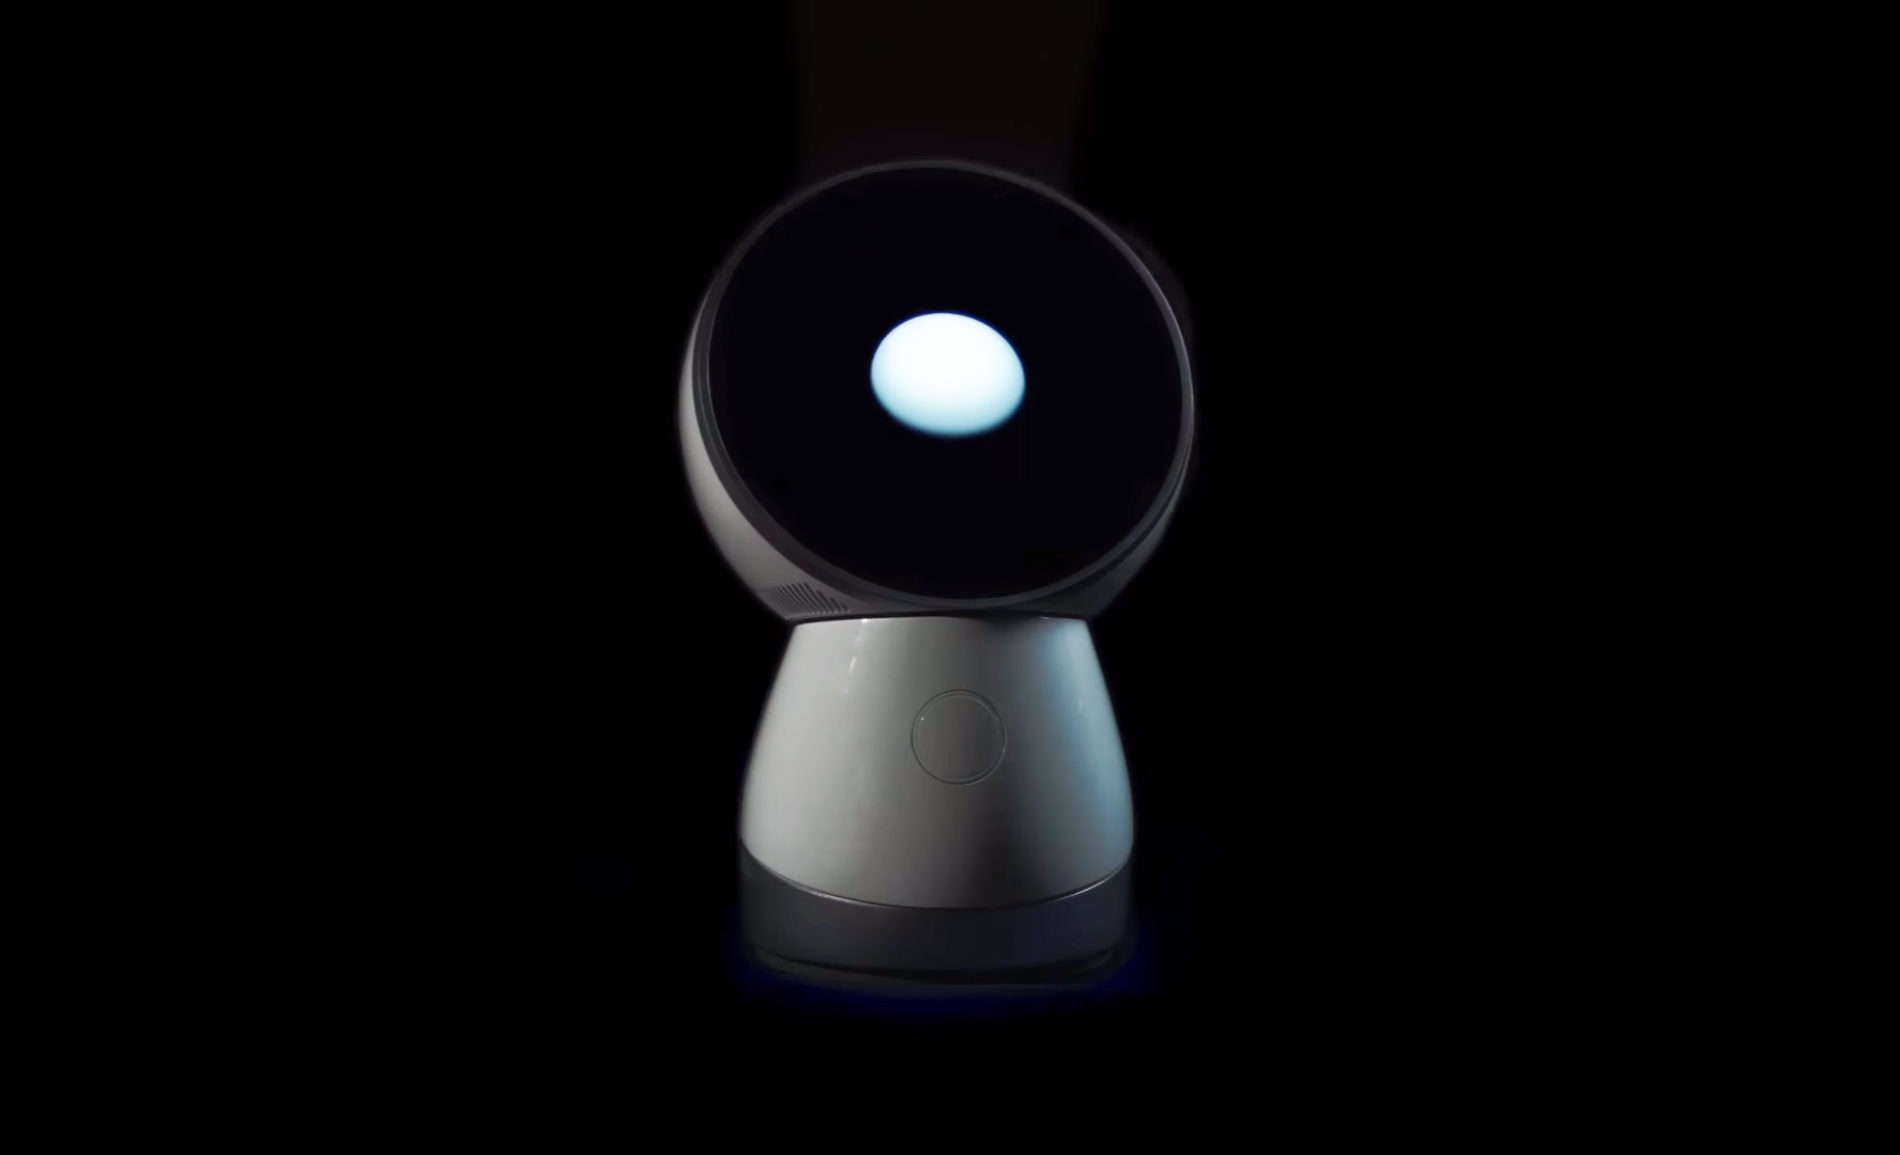 Jibo Wants to Be the World’s First Family Robot